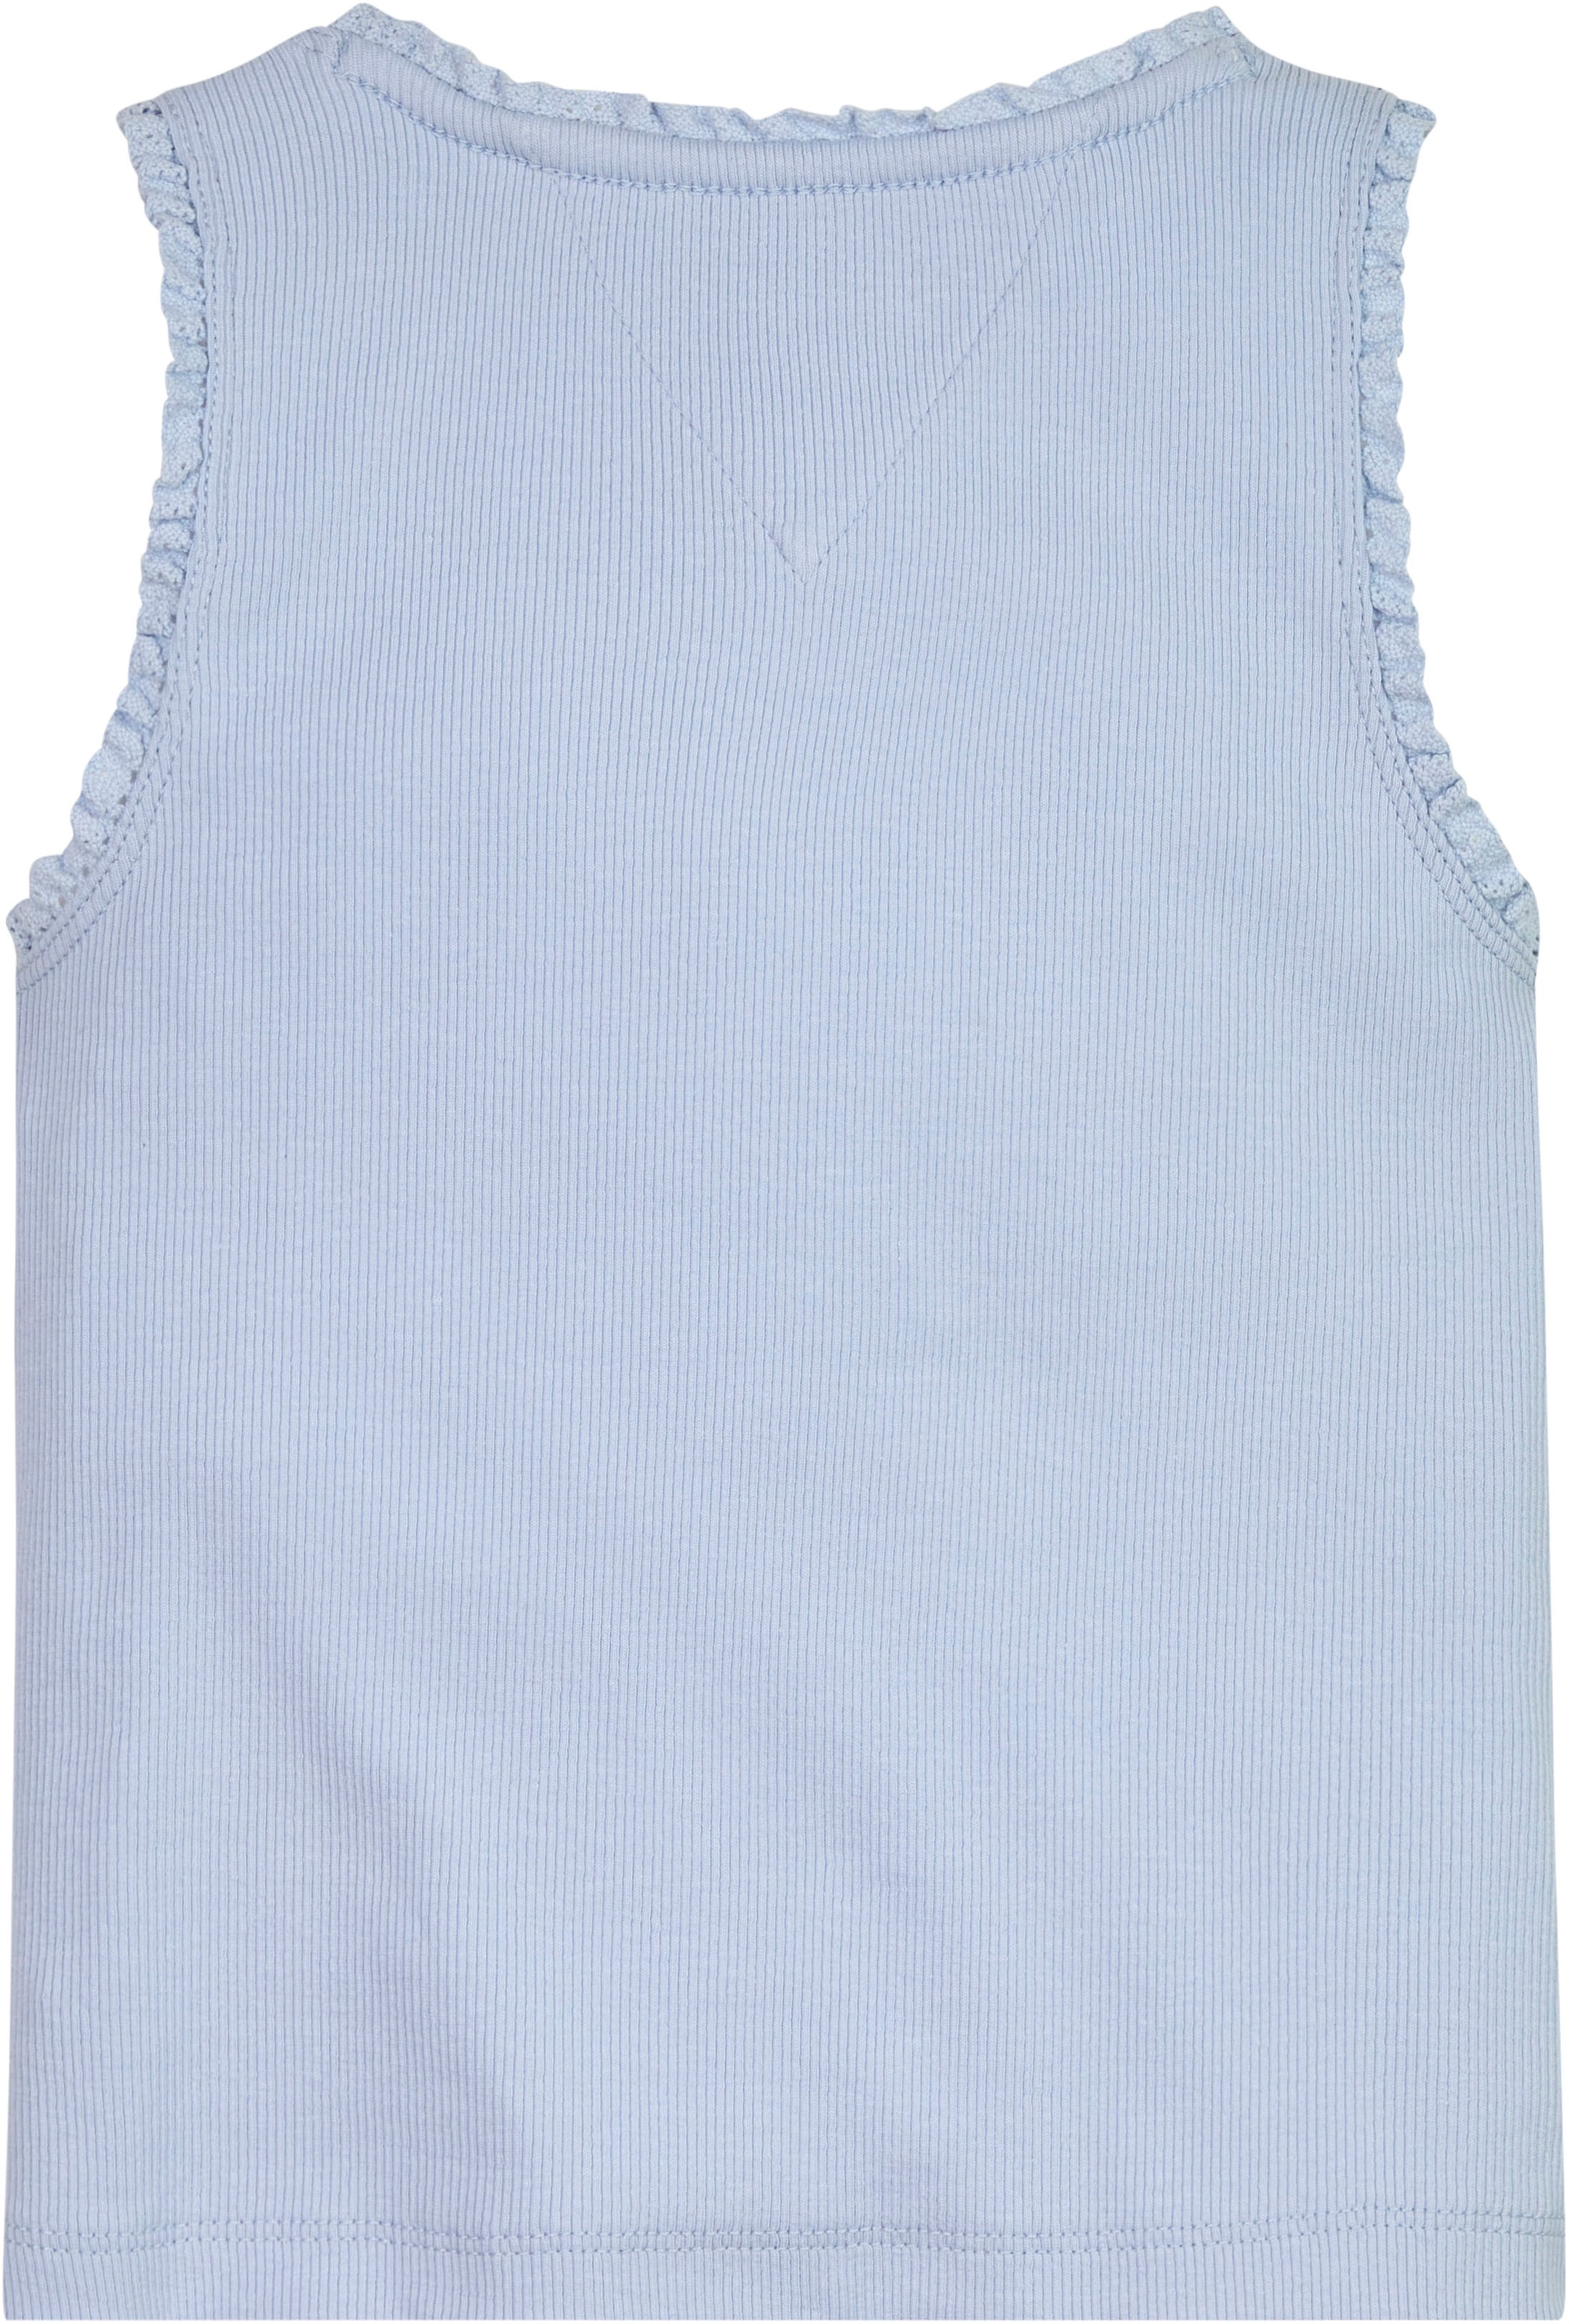 Tommy Hilfiger T-Shirt »ESSENTIAL RIB LACE TANK TOP«, Baby bis 2 Jahre